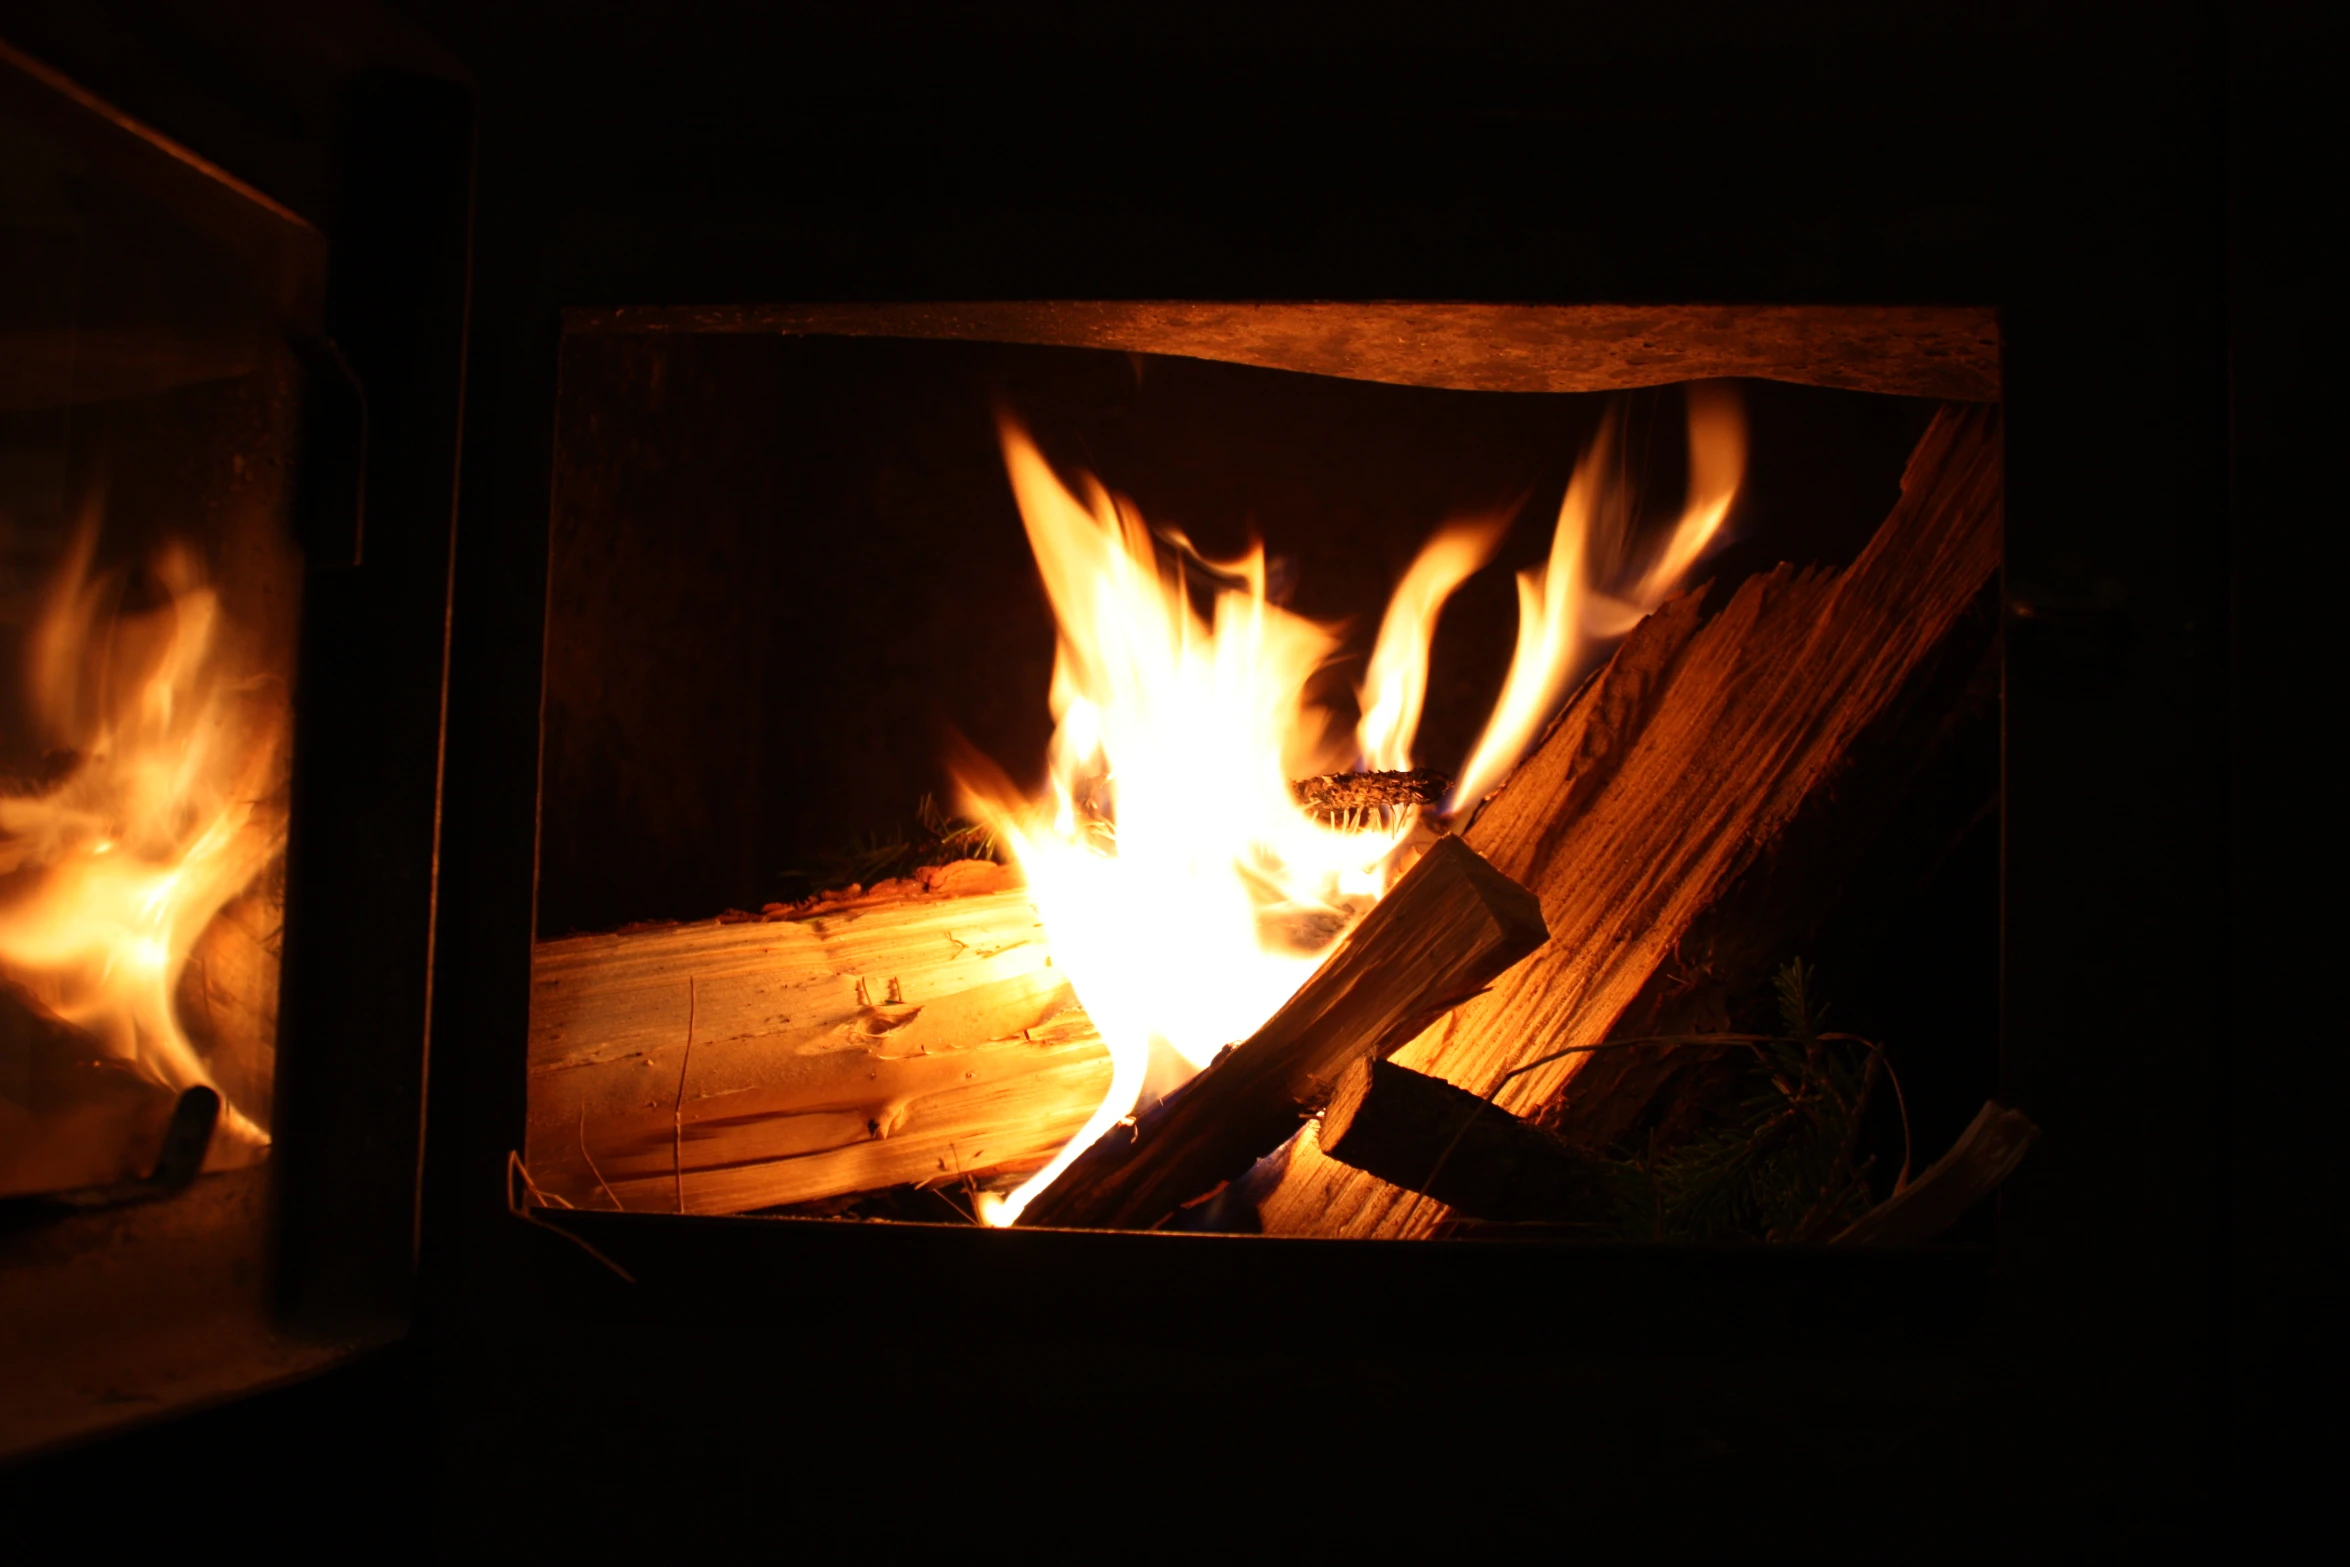 fire flames in a wood fired stove in a dark room